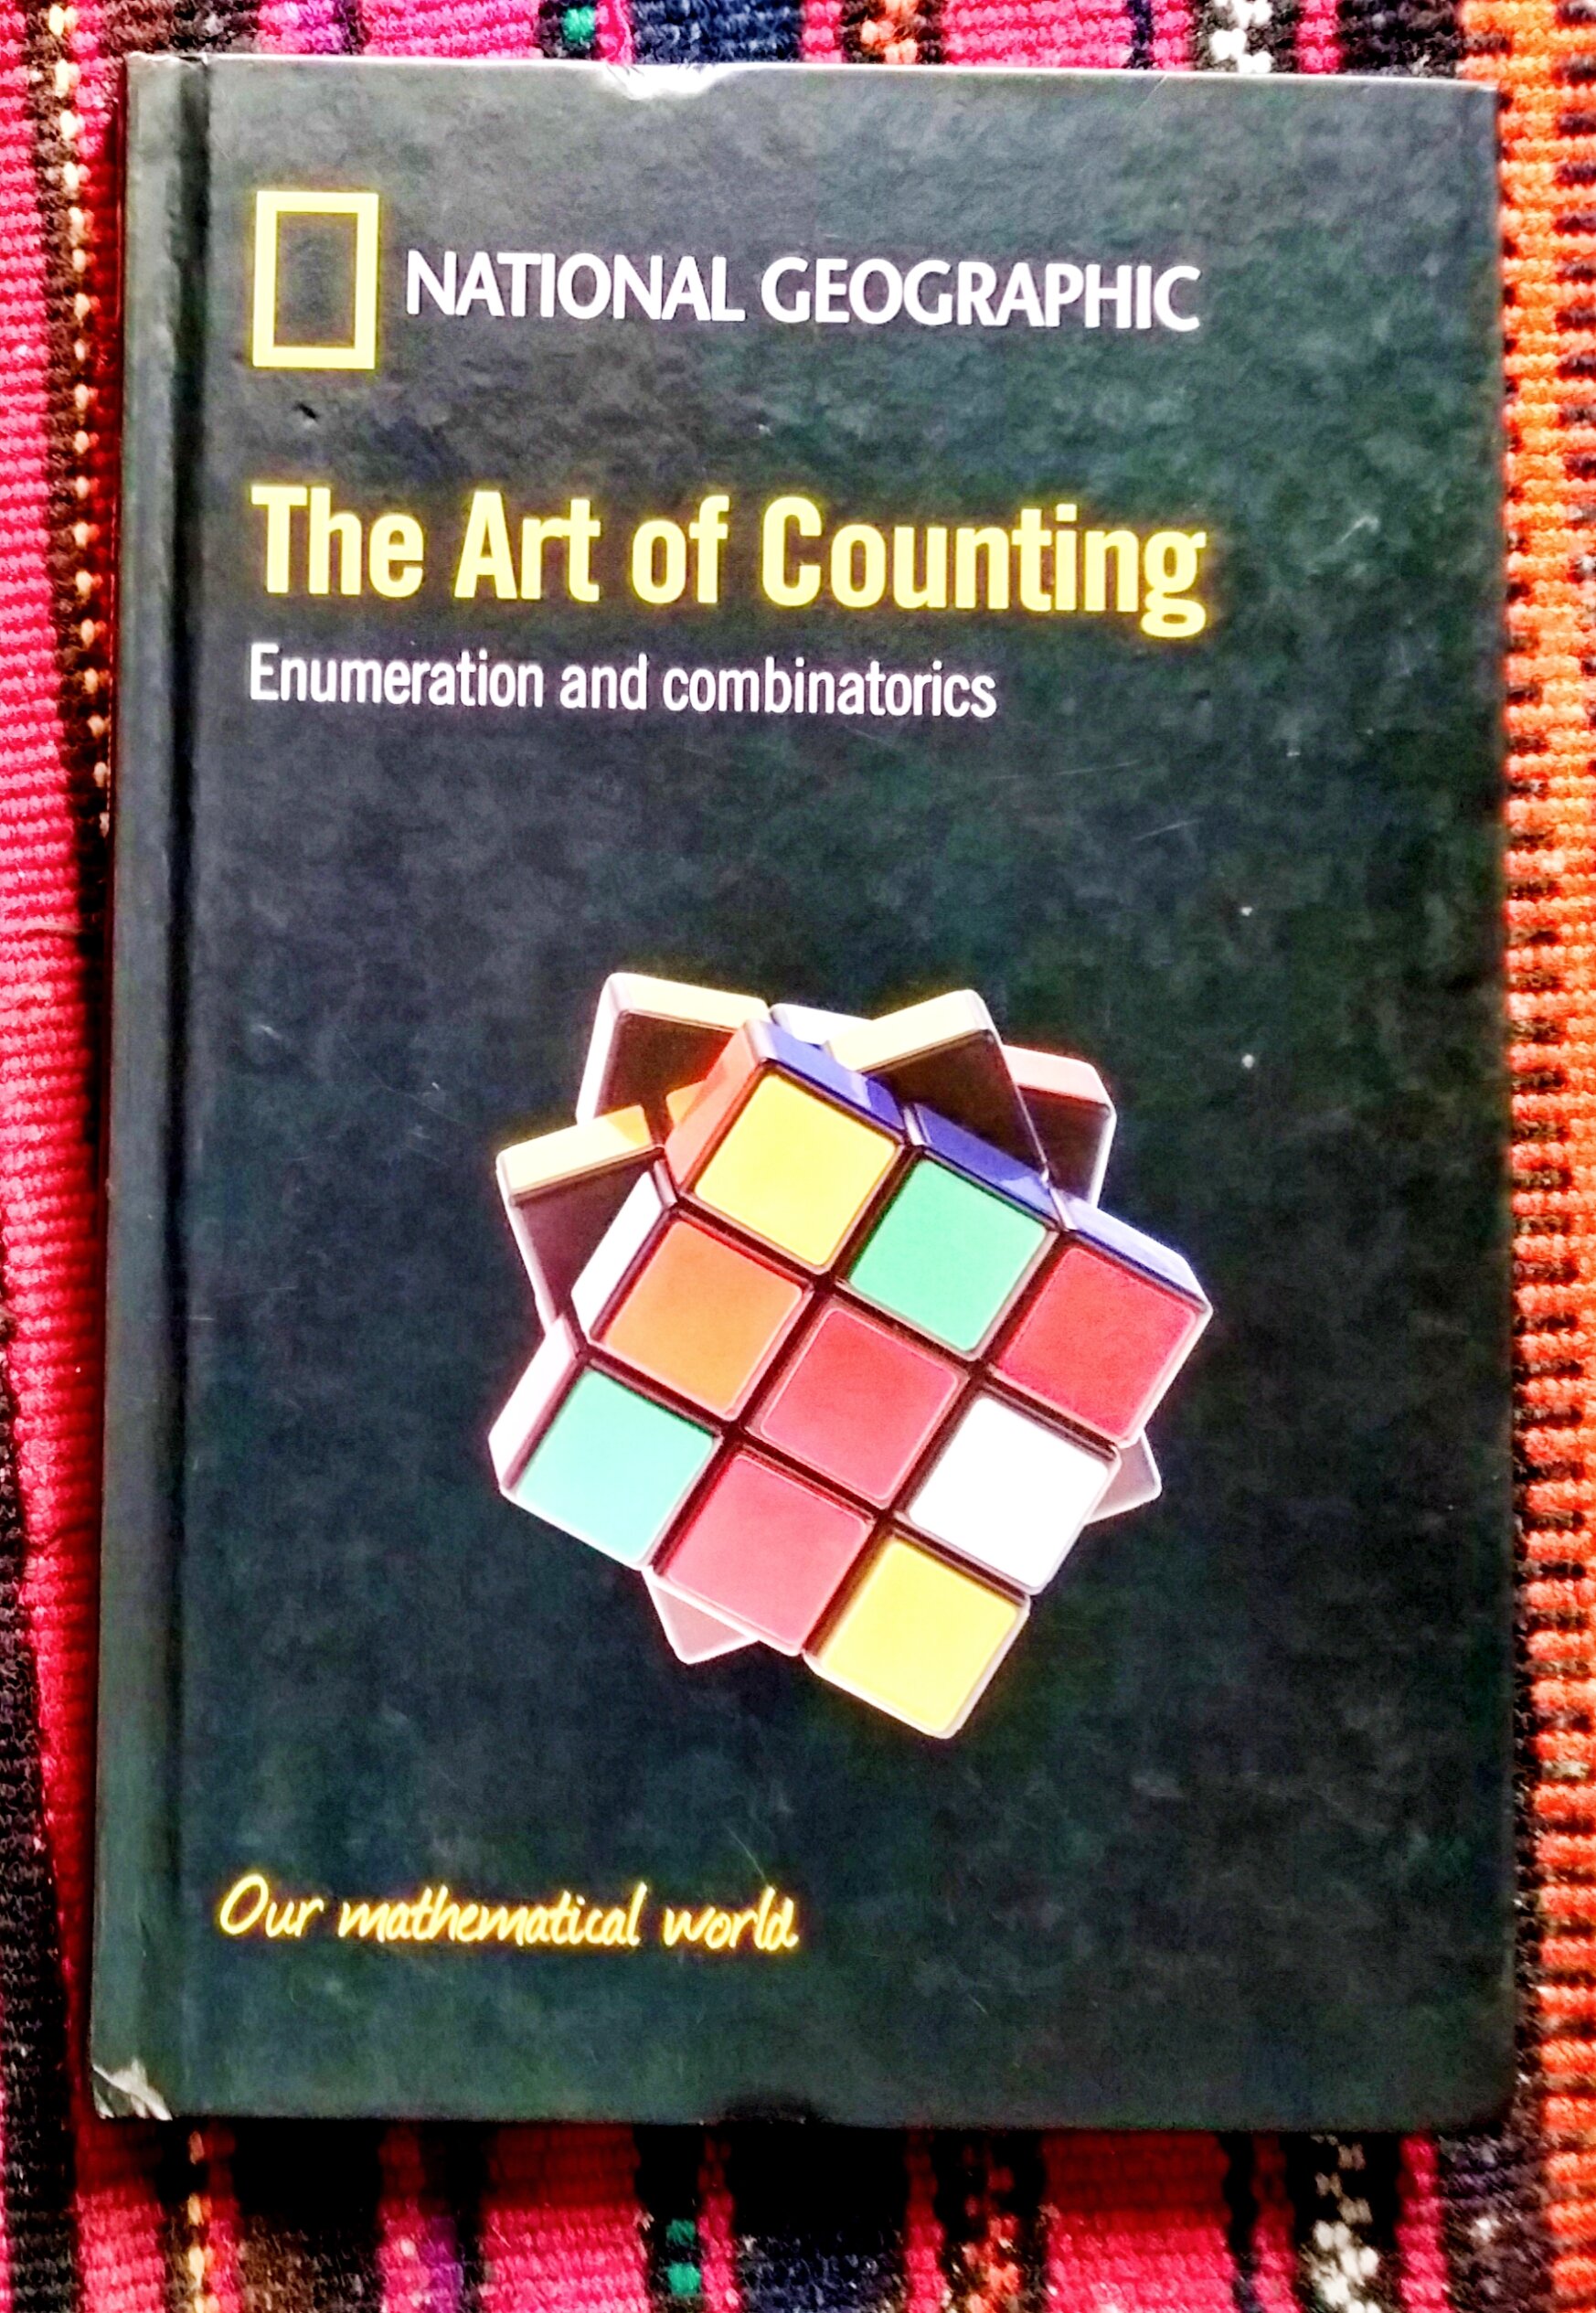 the art of counting: enumeration and combinatorics